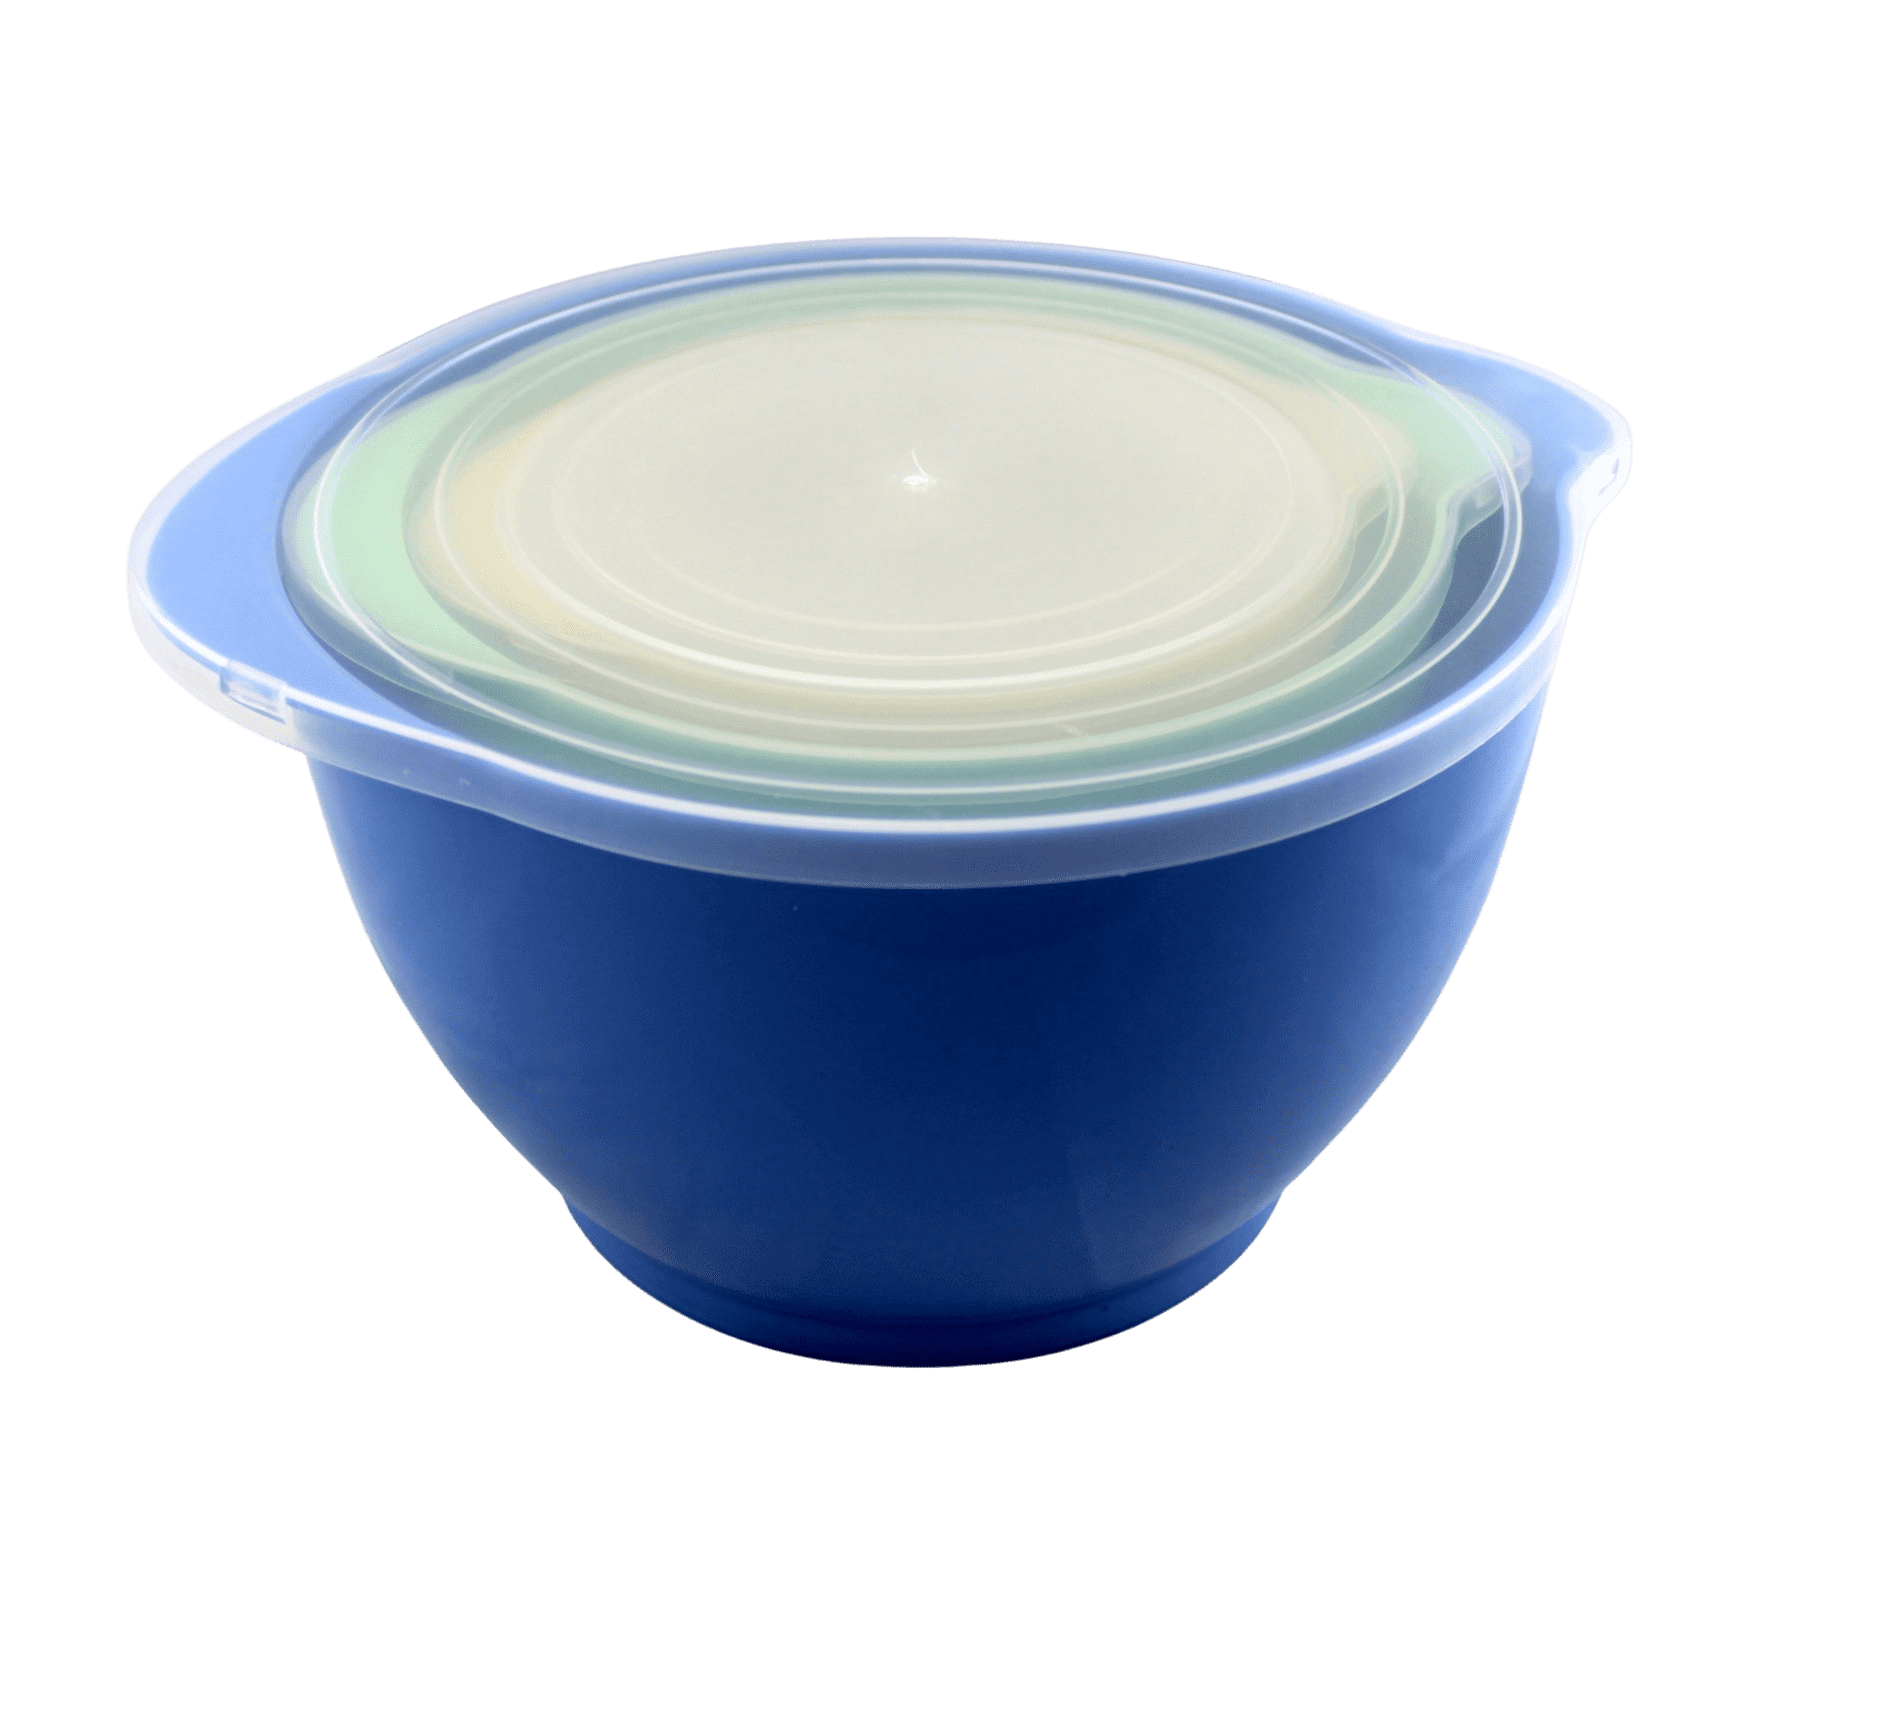 ANAMINA Large Mixing Bowl with 3 Extra Accessories - Never Splatter, Spill  or Worry Again - Breathtaking Mixing Bowl Set - Mixing Bowls with Lids Set